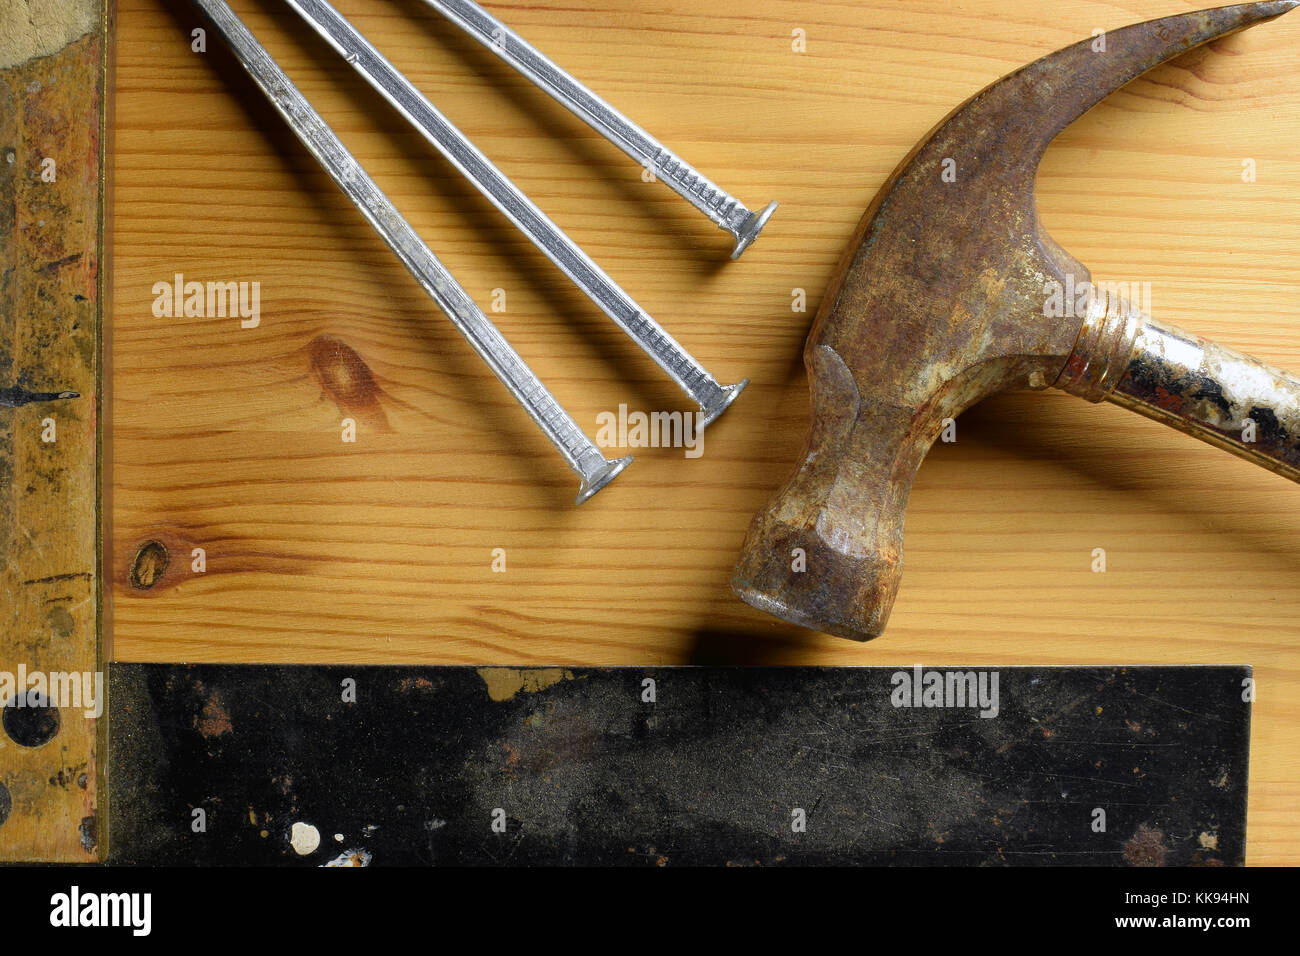 hammer nails and square on wooden background top view diy tools image KK94HN